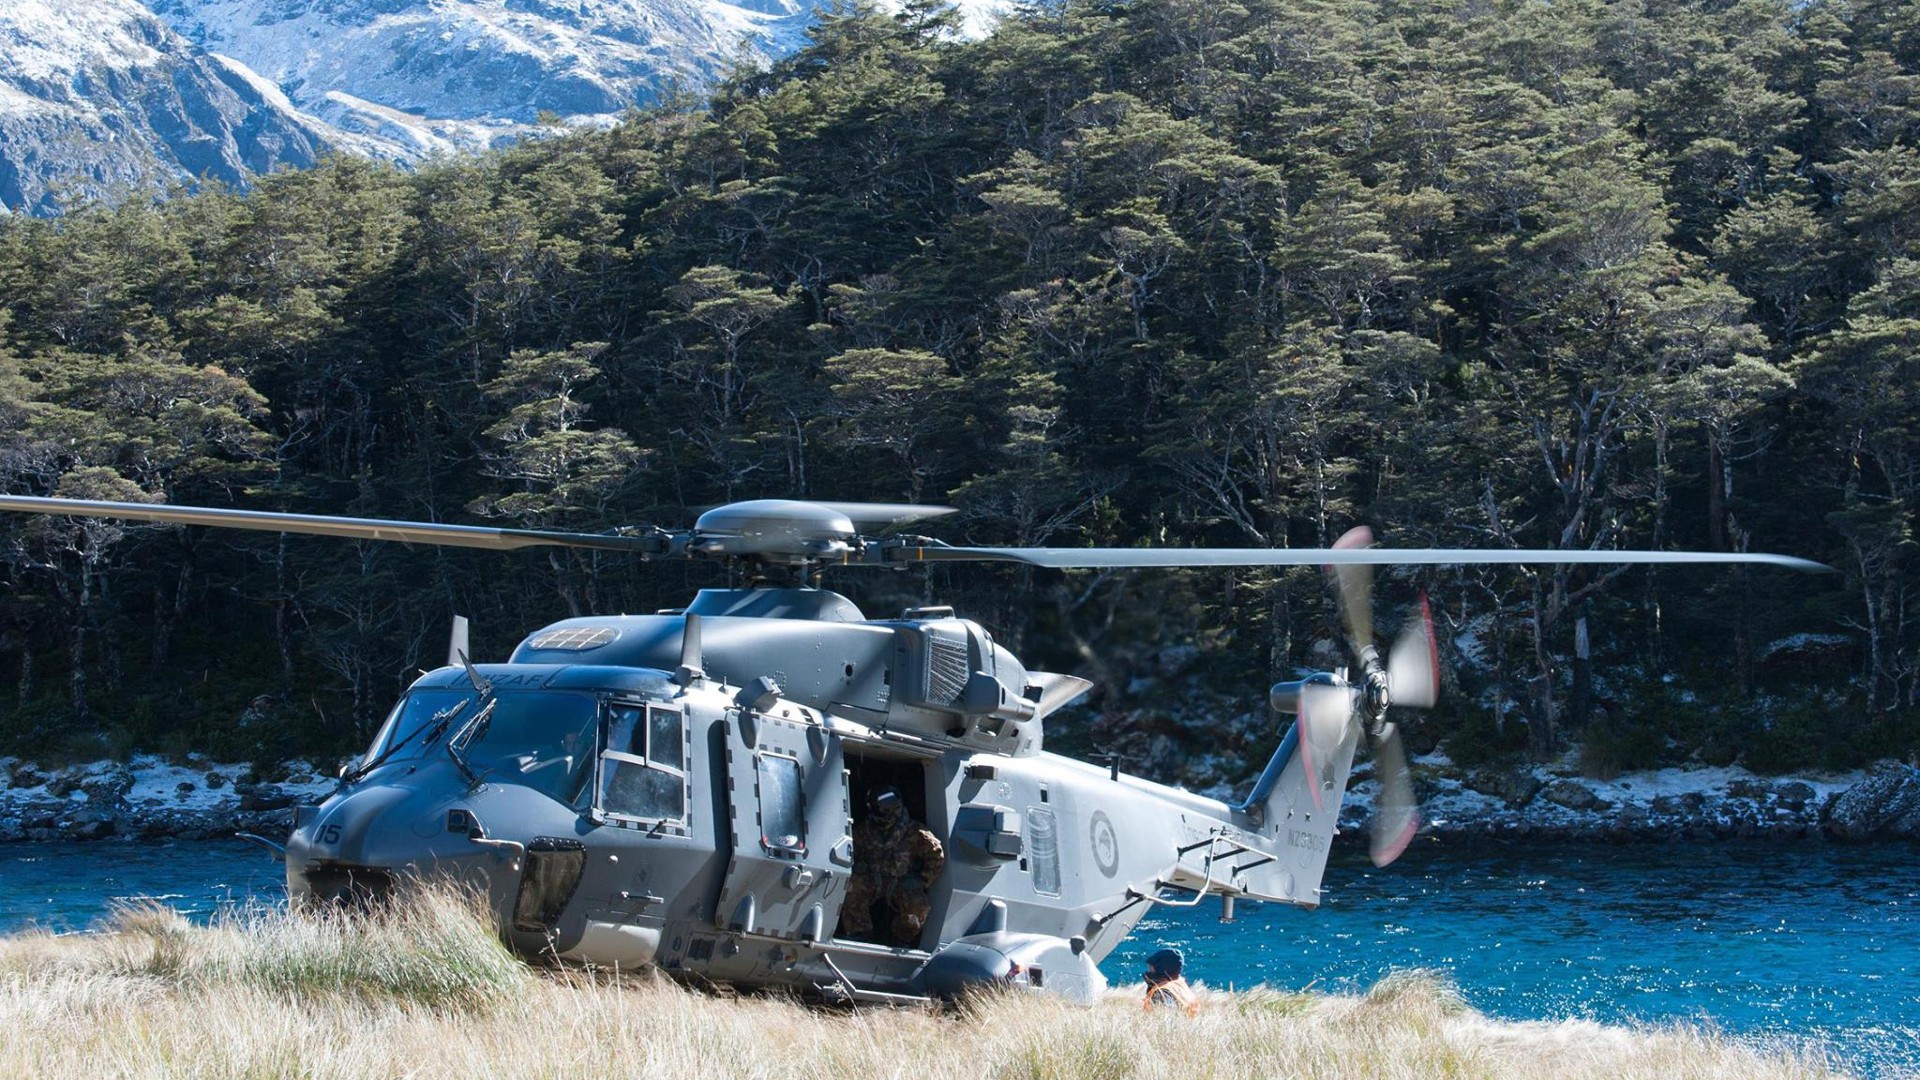 General 1920x1080 military helicopters soldier military aircraft New Zealand vehicle military vehicle aircraft Royal New Zealand Air Force air force forest nature river NHIndustries NH90